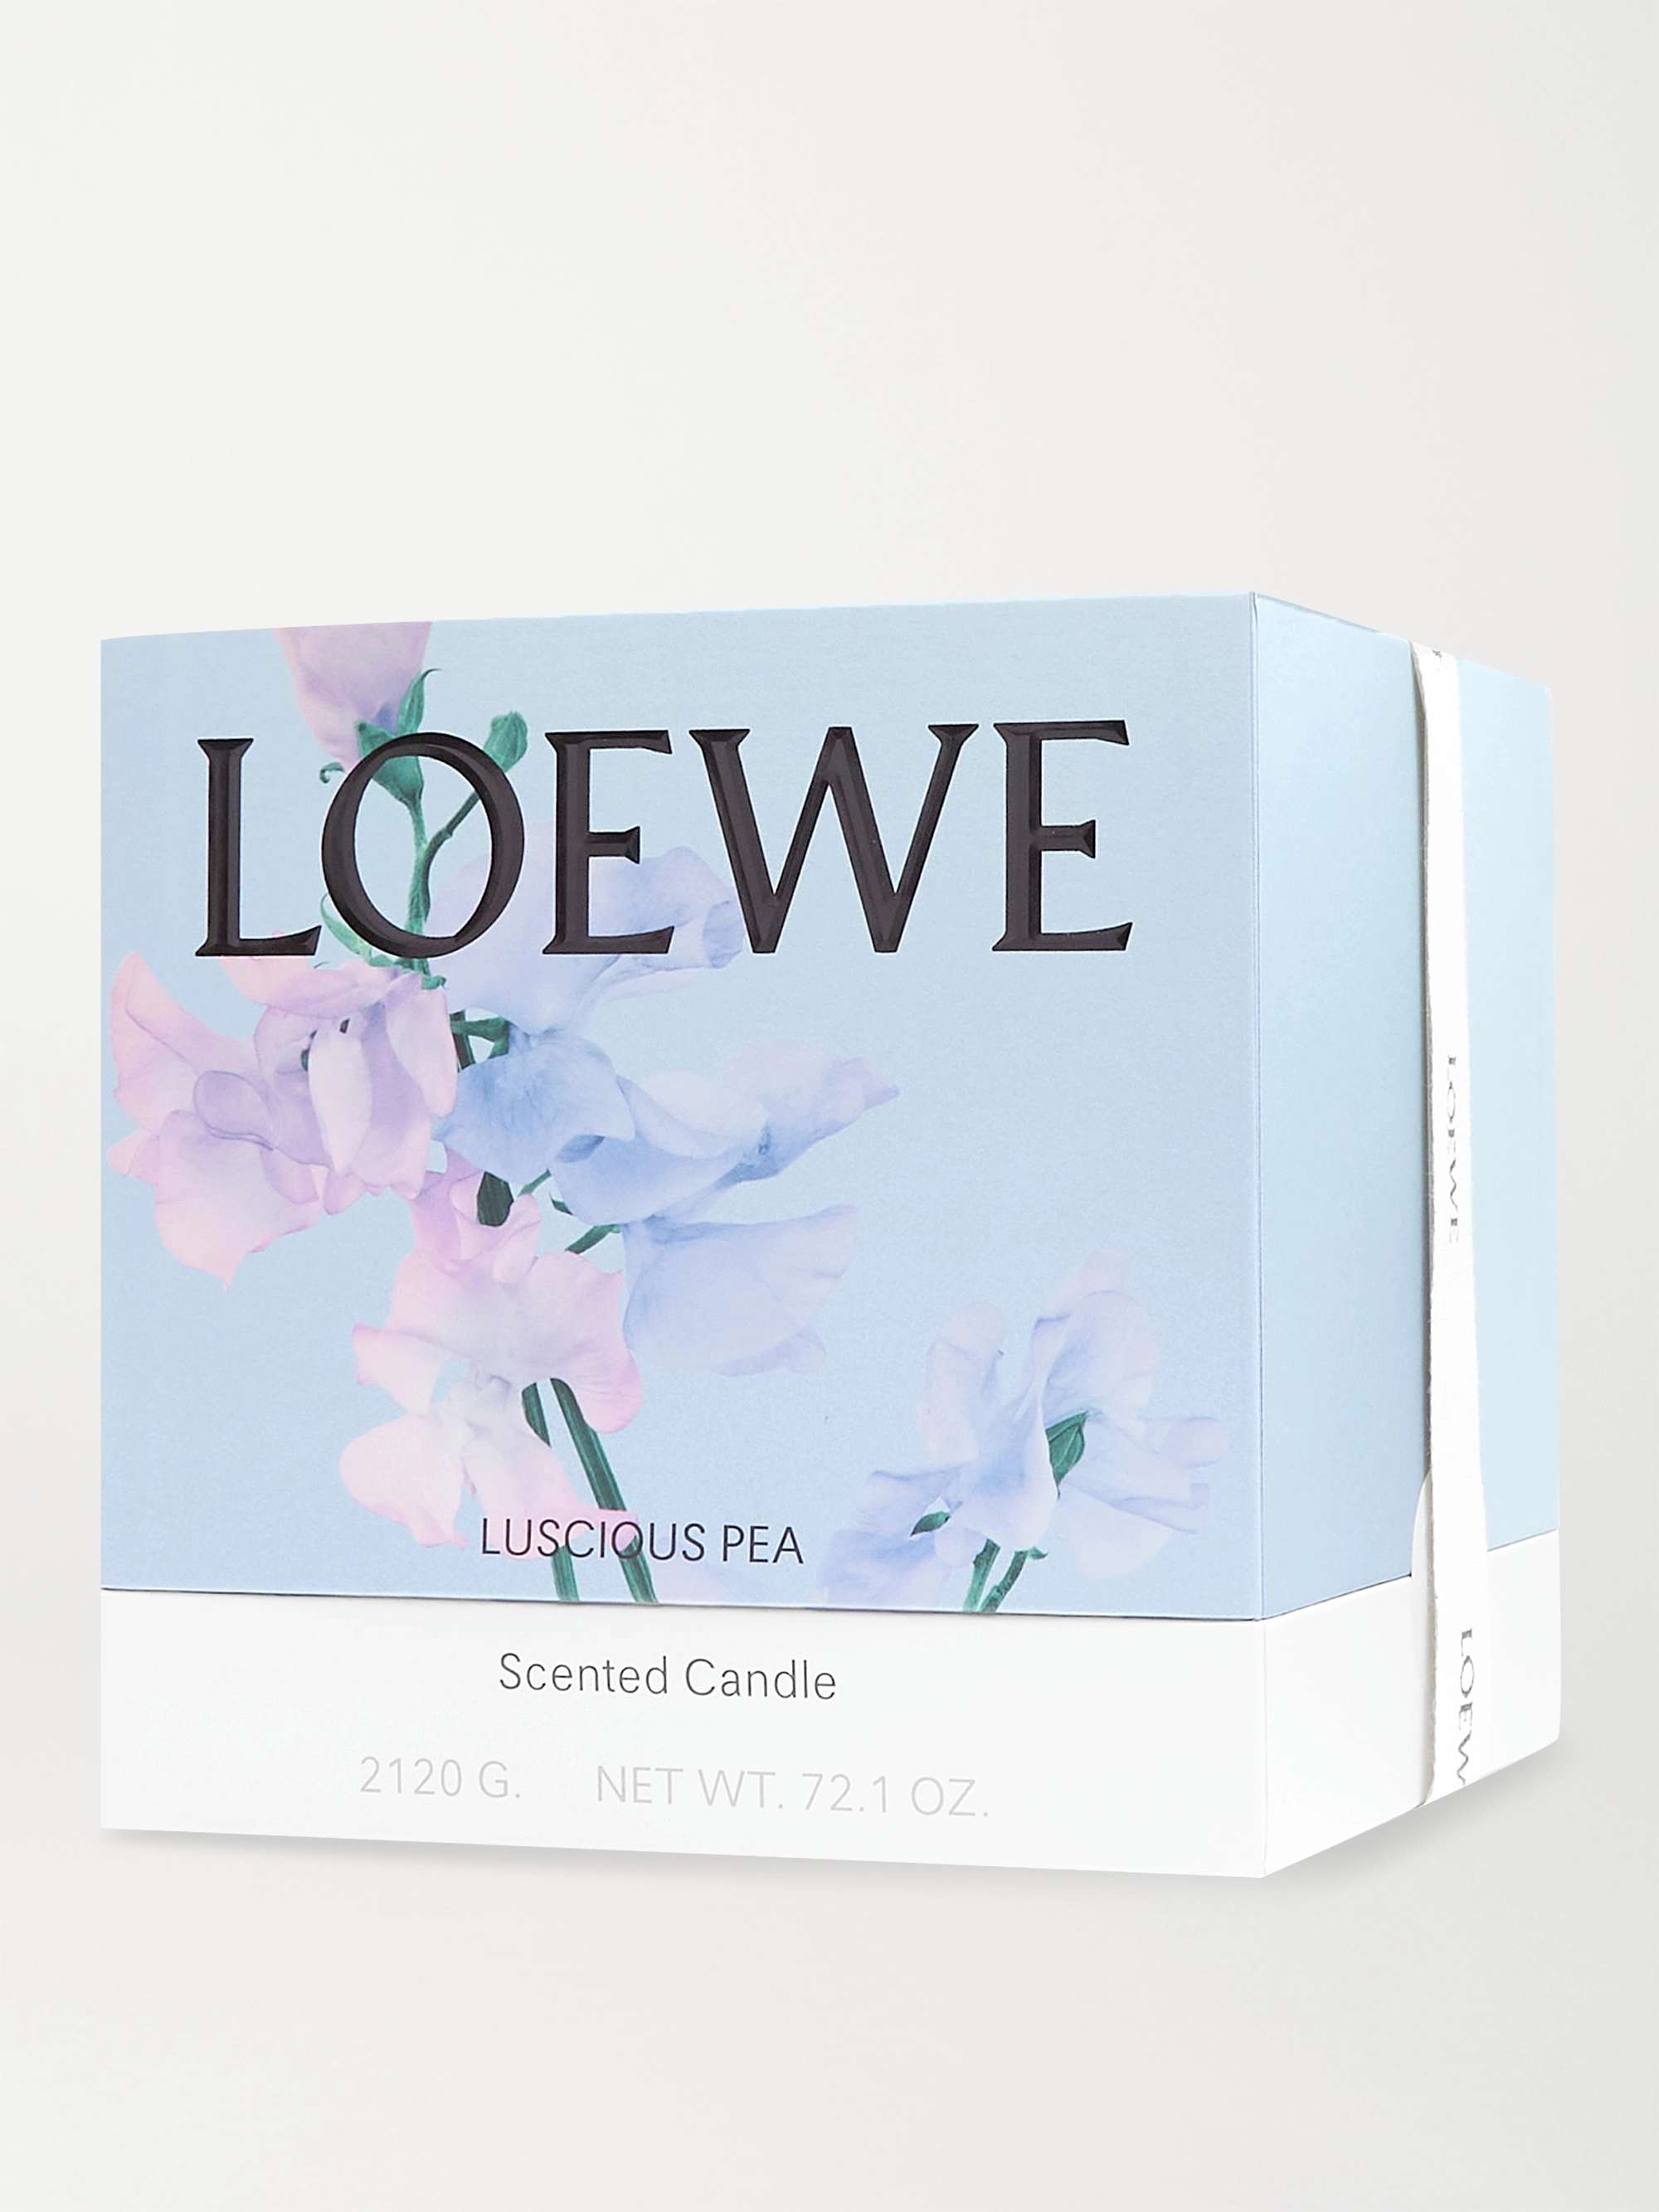 LOEWE HOME SCENTS Marihuana Scented Candle, 2120g